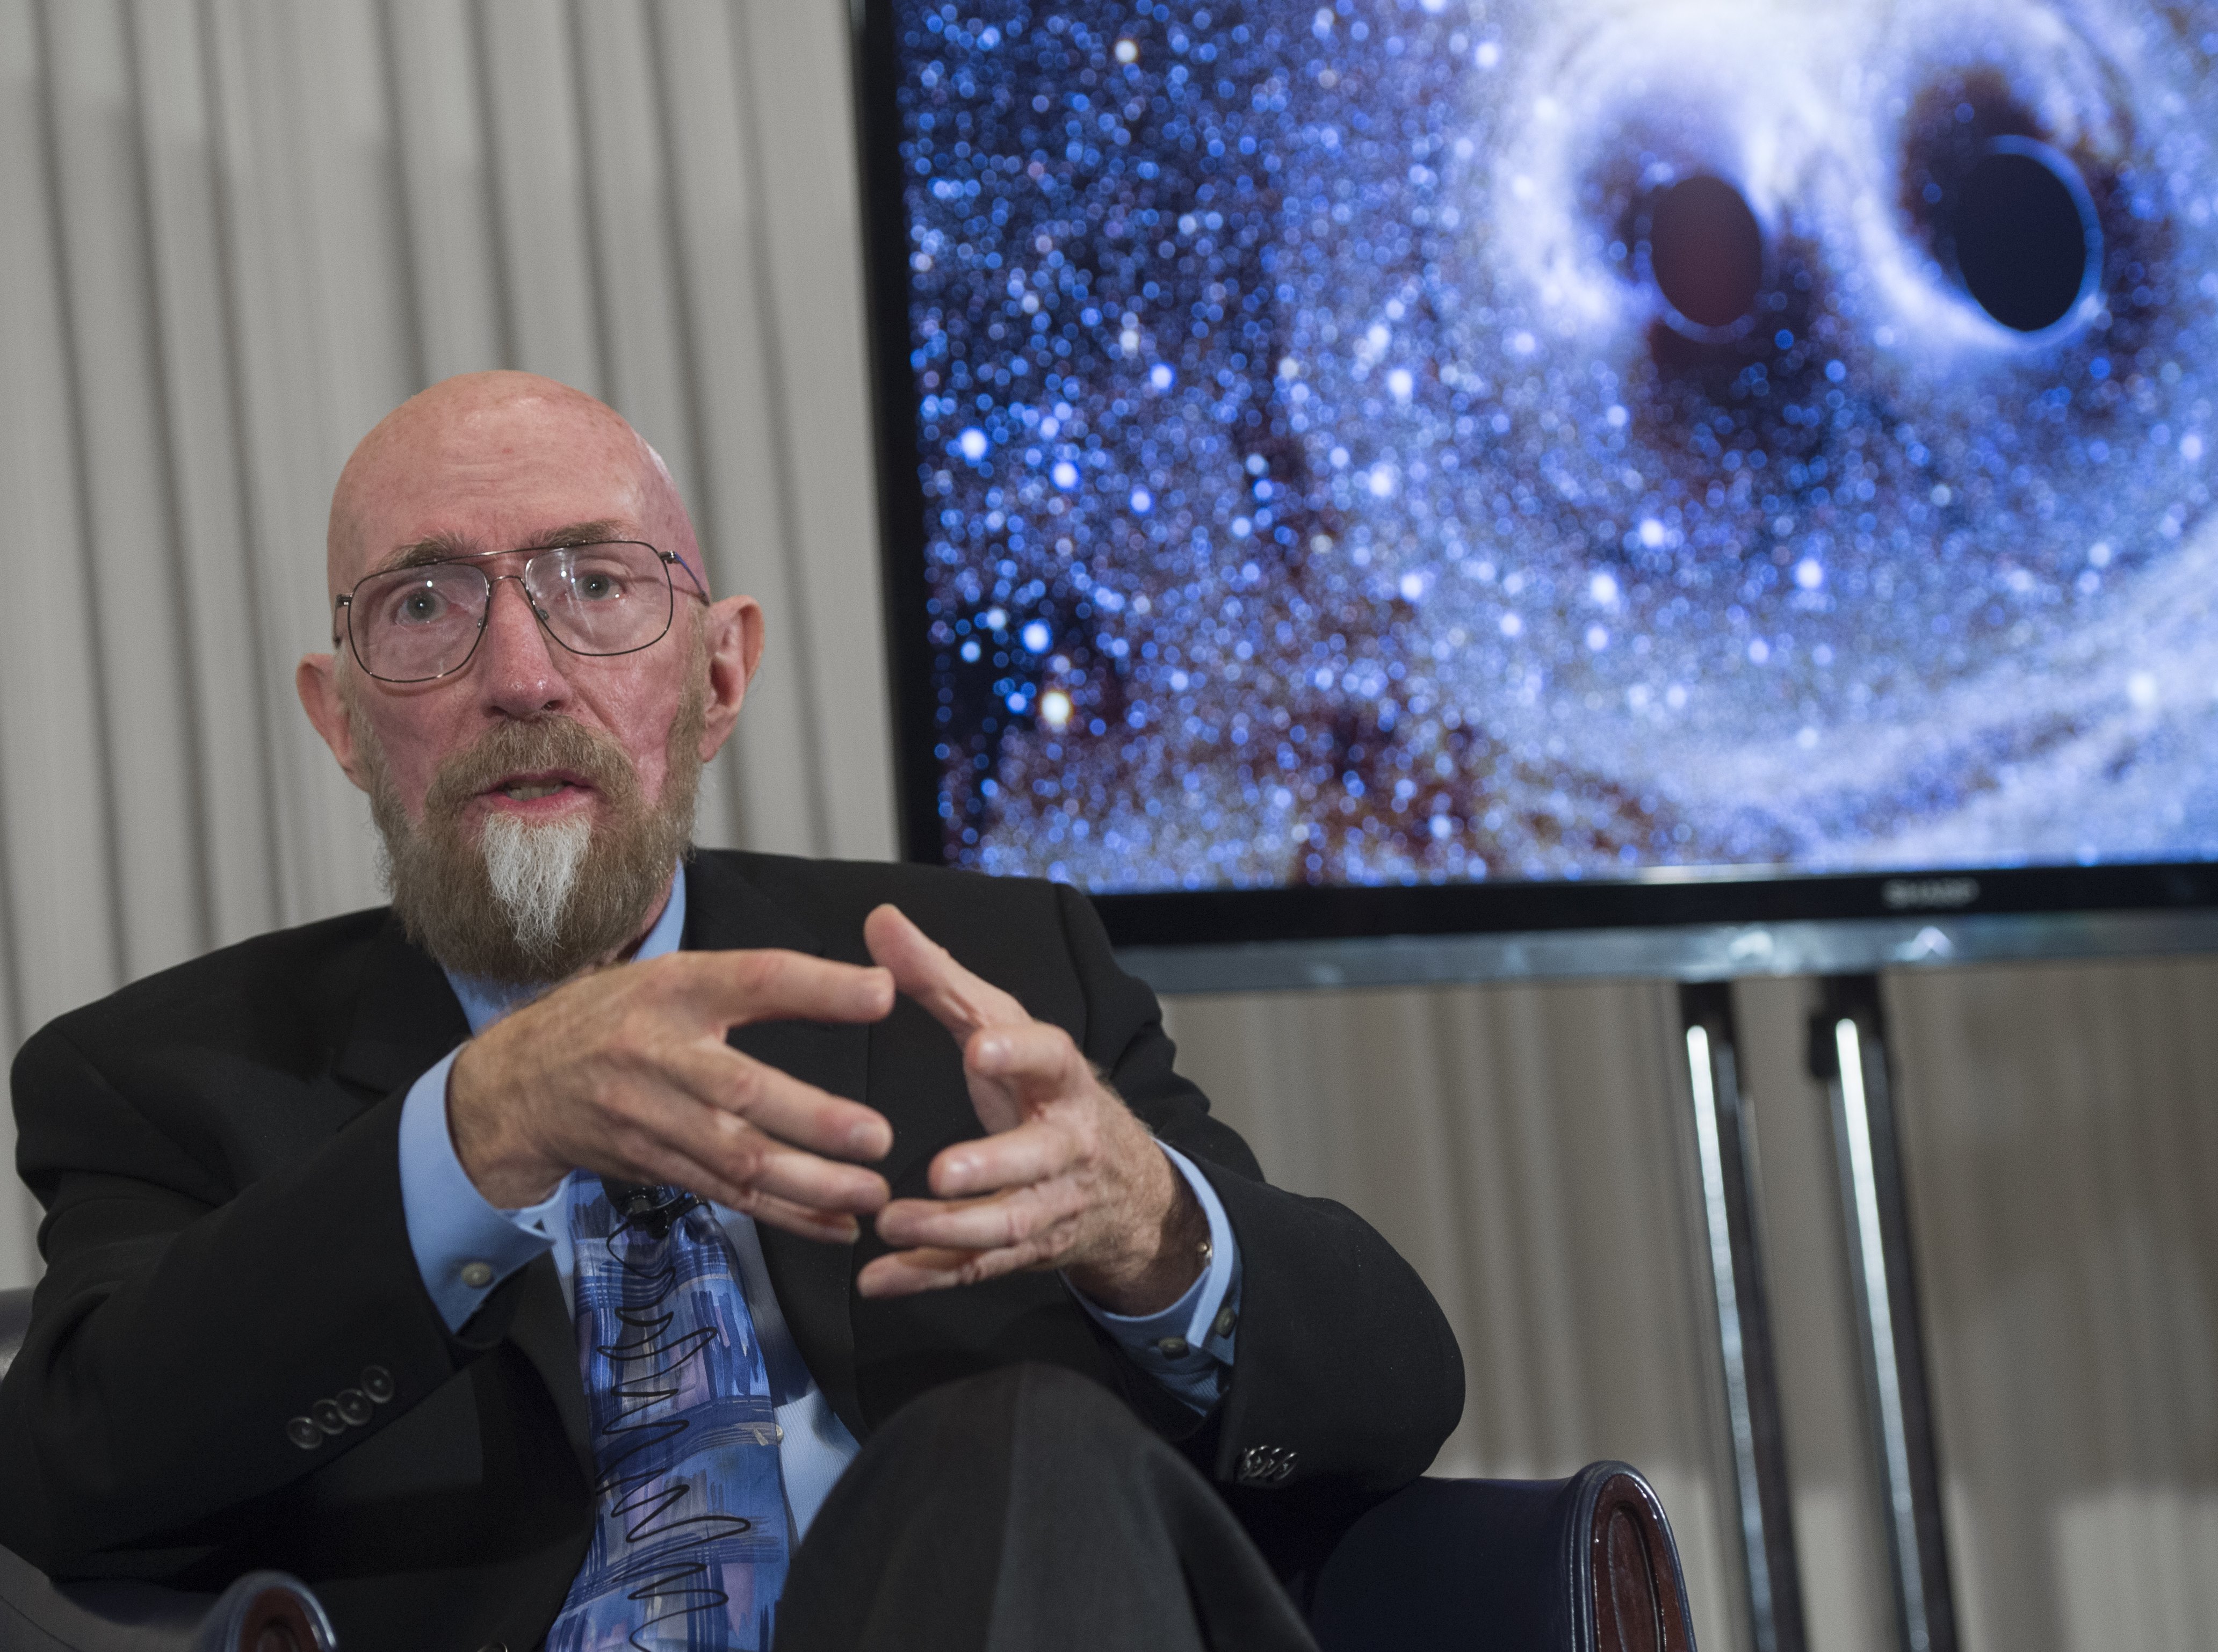 LIGO co-founders Kip Thorne speaks about the discovery that scientists have observed the ripples in the fabric of spacetime called gravitational waves for the first time, confirming a prediction of Albert Einstein's theory of relativity, during a press conference at the National Press Club in Washington, DC, February 11, 2016. The machines that gave scientists their first-ever glimpse at gravitational waves are the most advanced detectors ever built for sensing tiny vibrations in the universe.The two US-based underground detectors are known as the Laser Interferometer Gravitational-wave Observatory, or LIGO for short.  / AFP PHOTO / SAUL LOEB